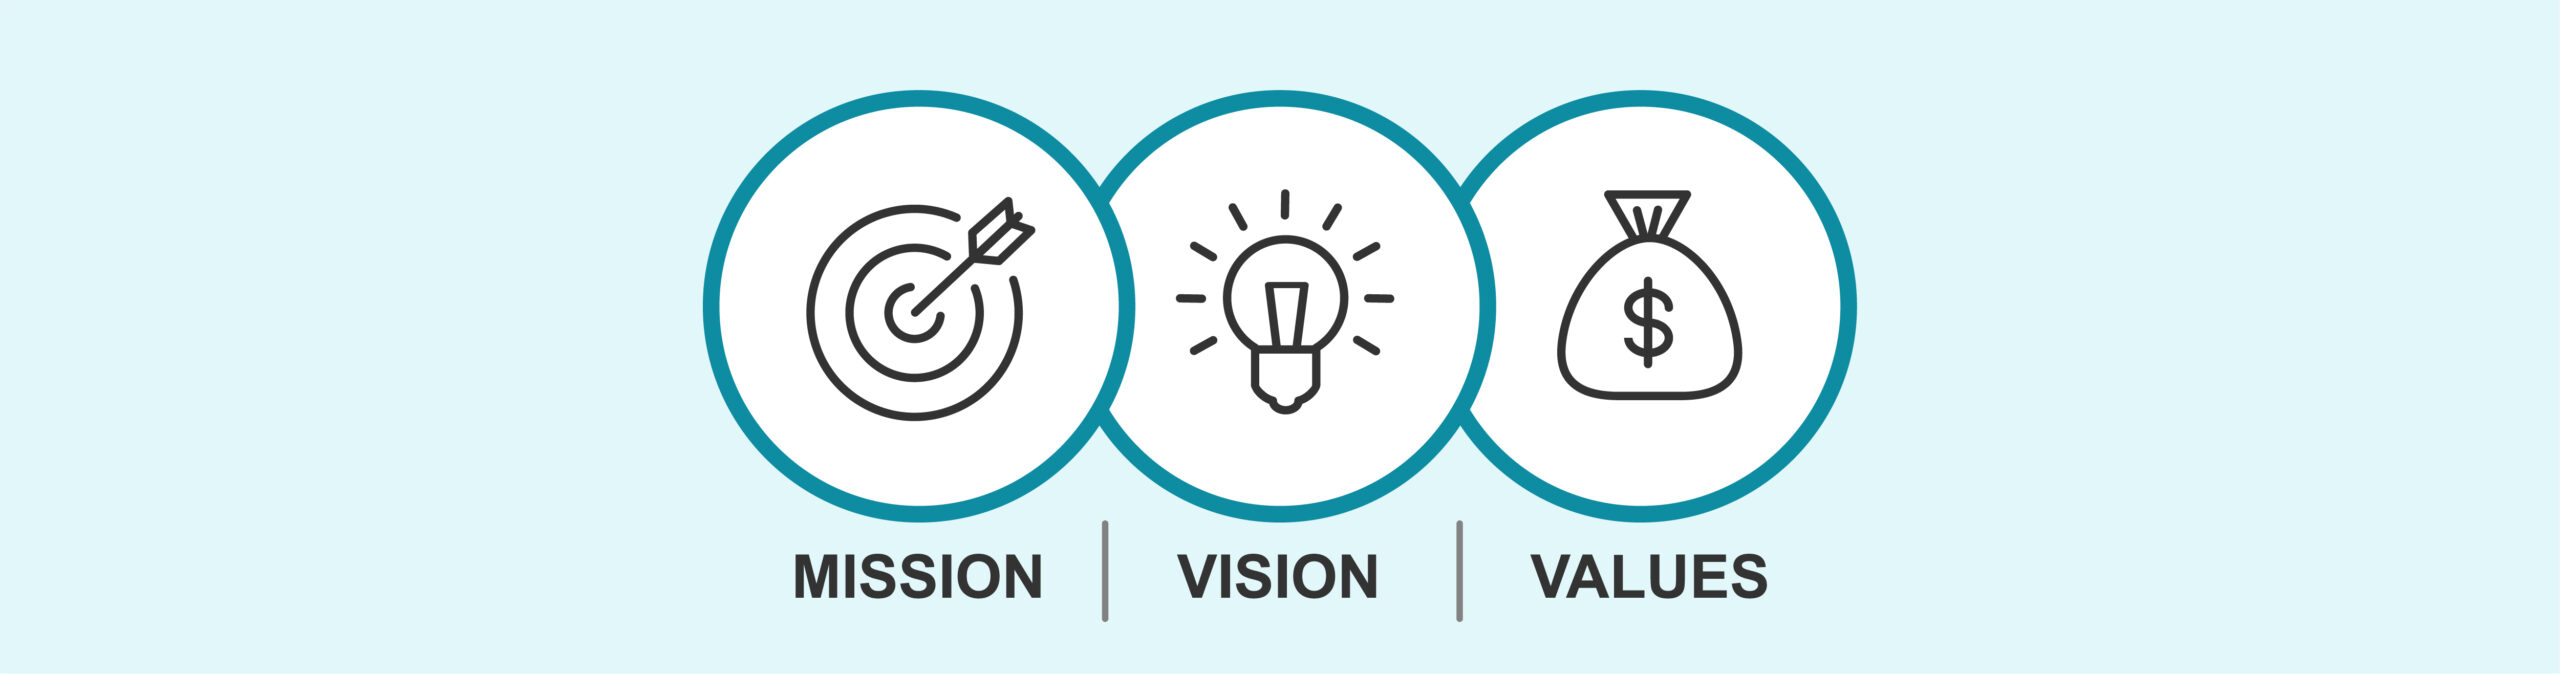 Icons for mission, vision and values of an organization or company, digital strategy objectives aligned with company objectives